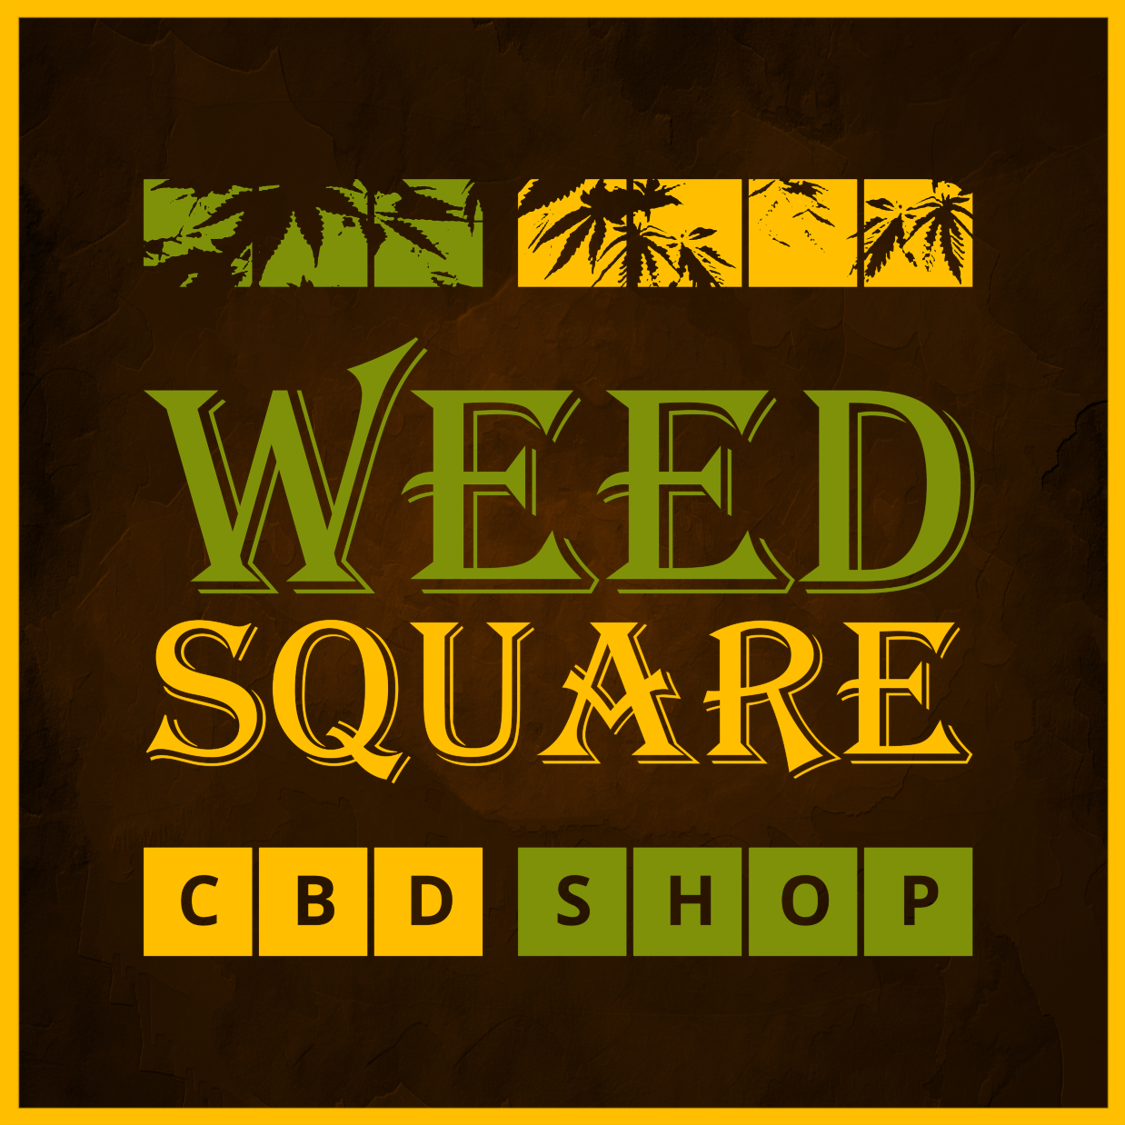 Weed Square